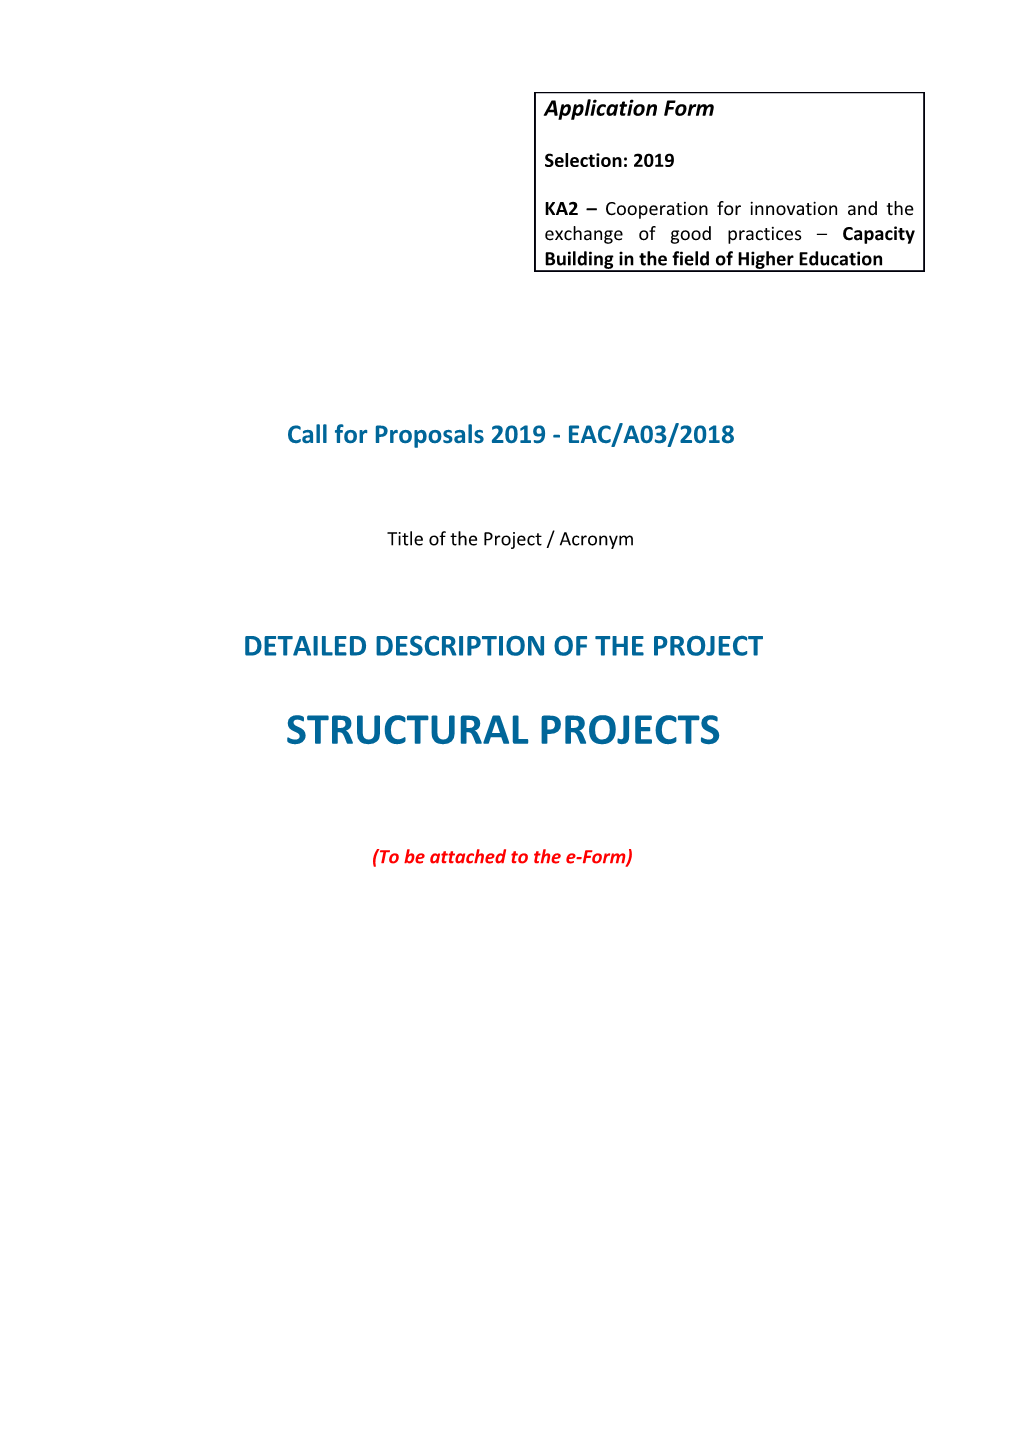 Capacity Building in the Field of Higher Education Structural Projects